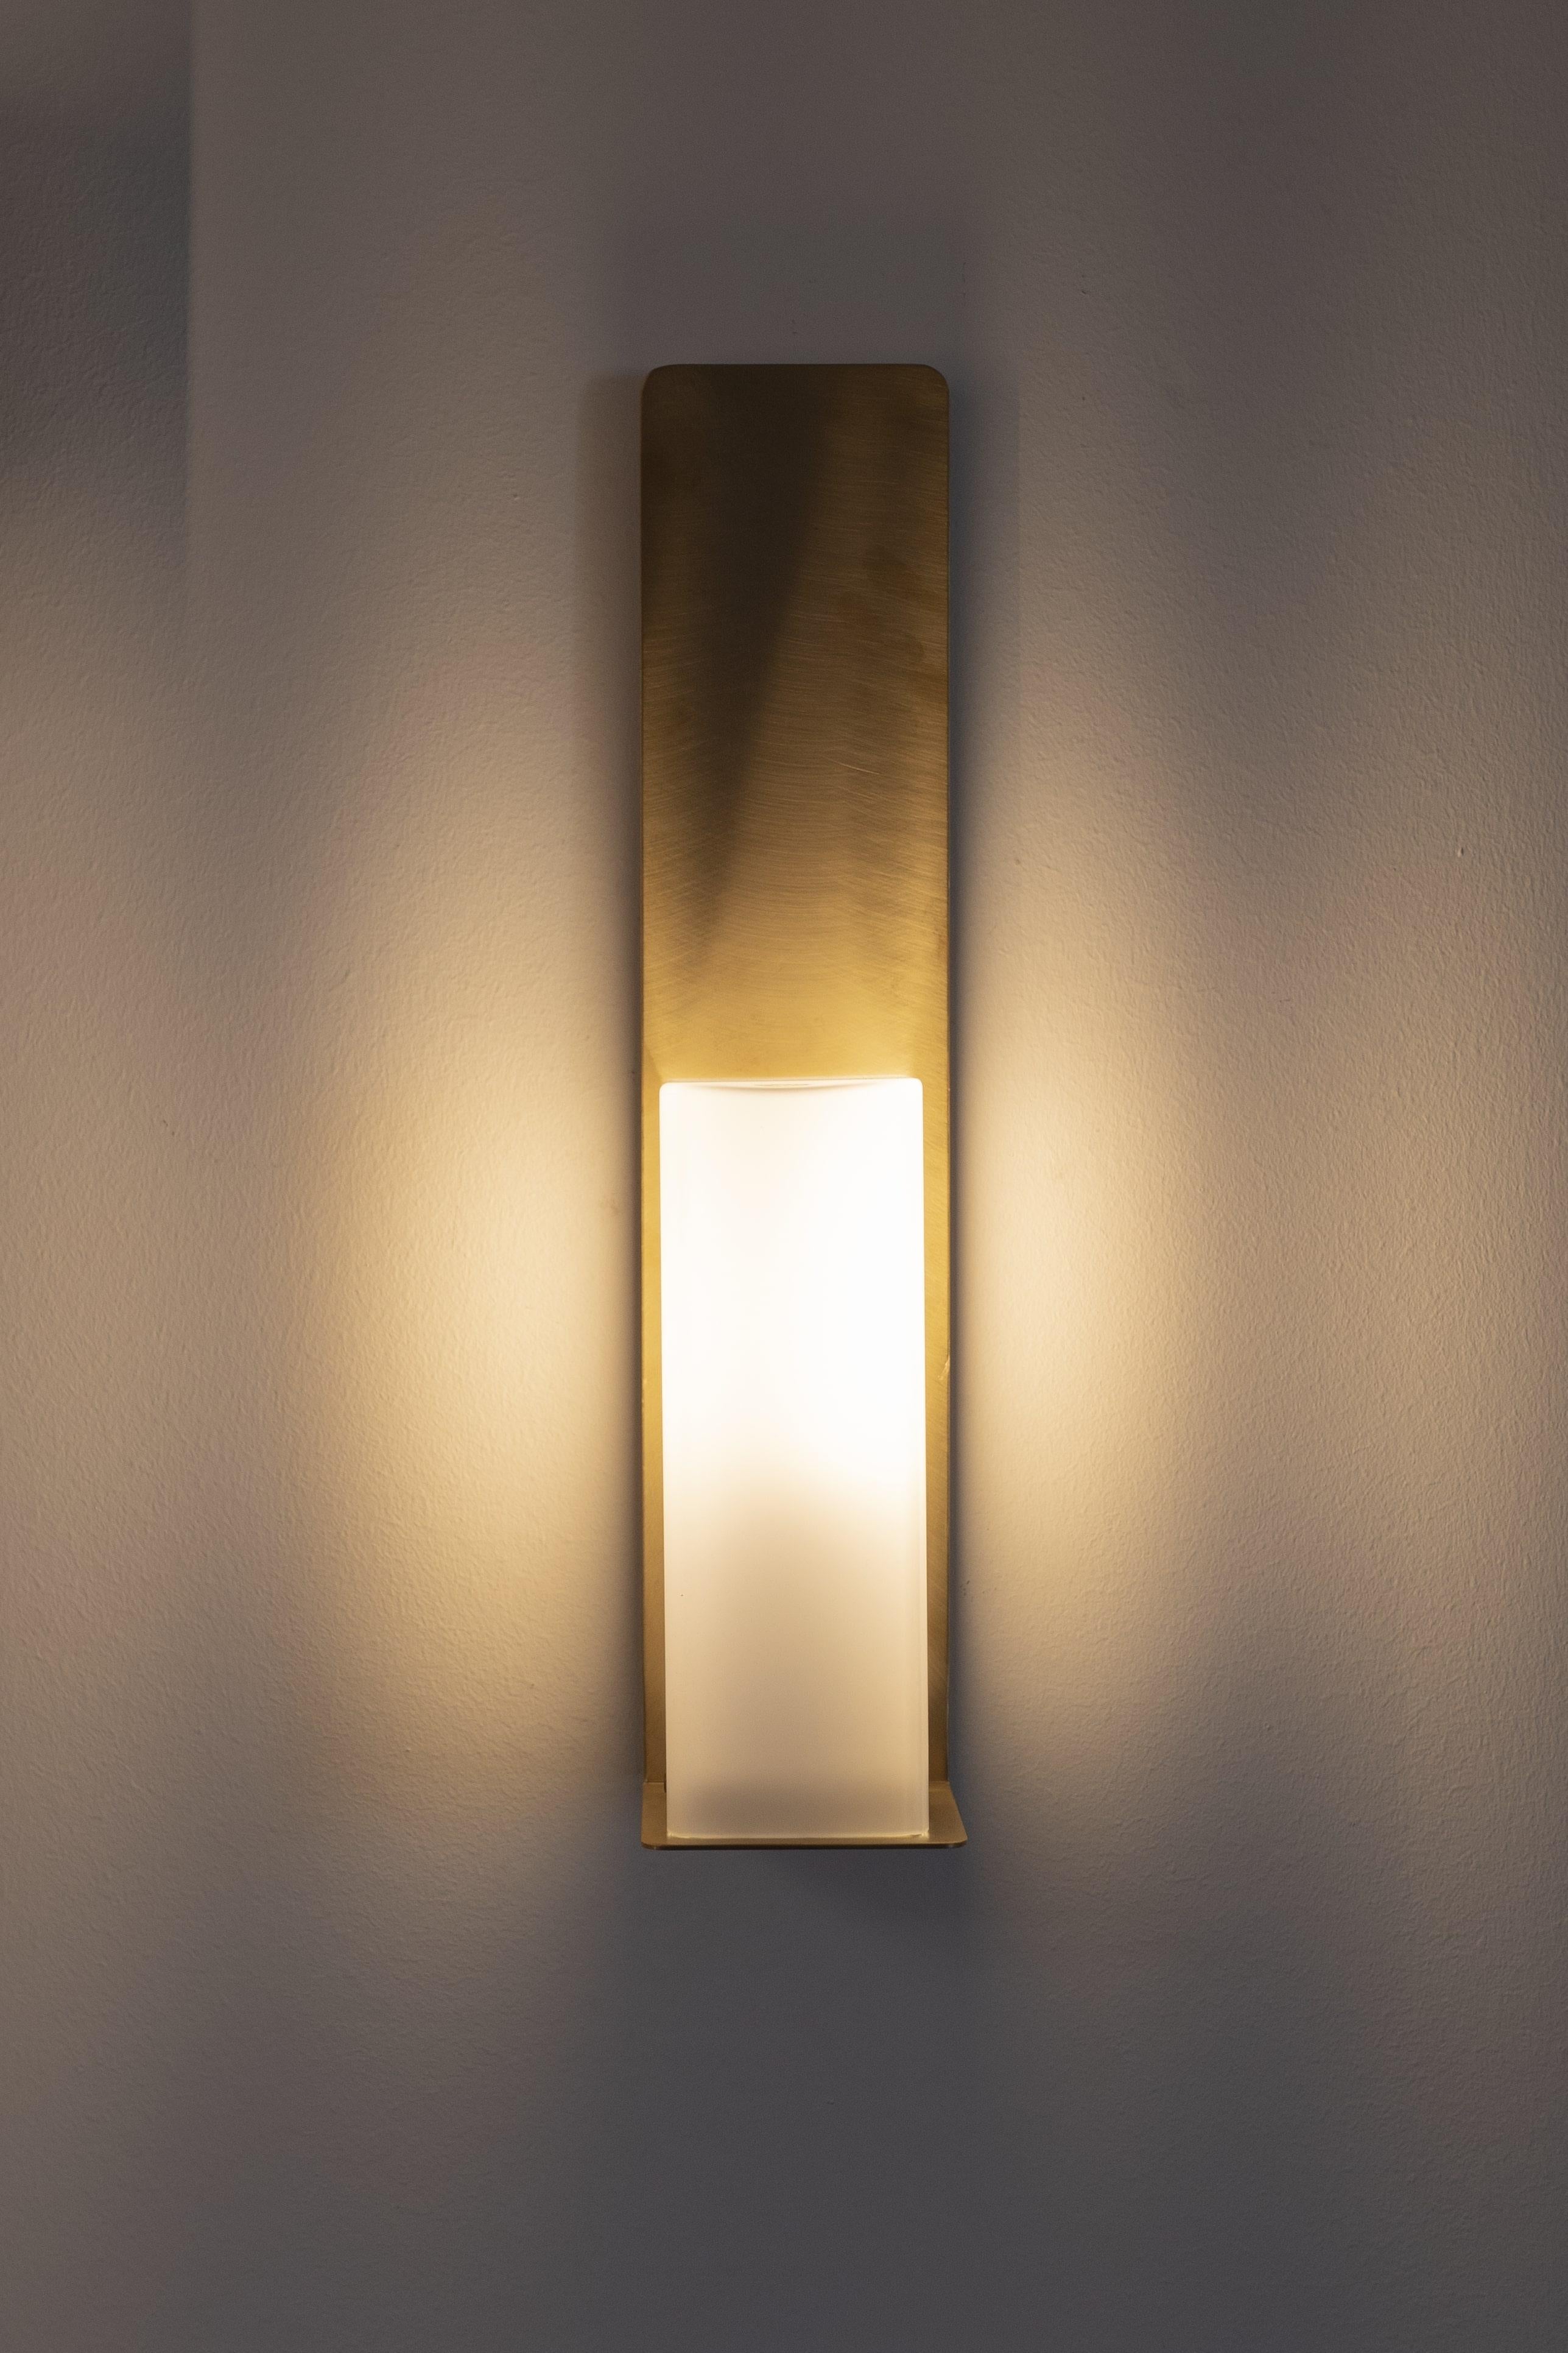 Solid Brass Contemporary-Modern Wall Light Handcrafted in Italy In New Condition For Sale In Saonara, IT